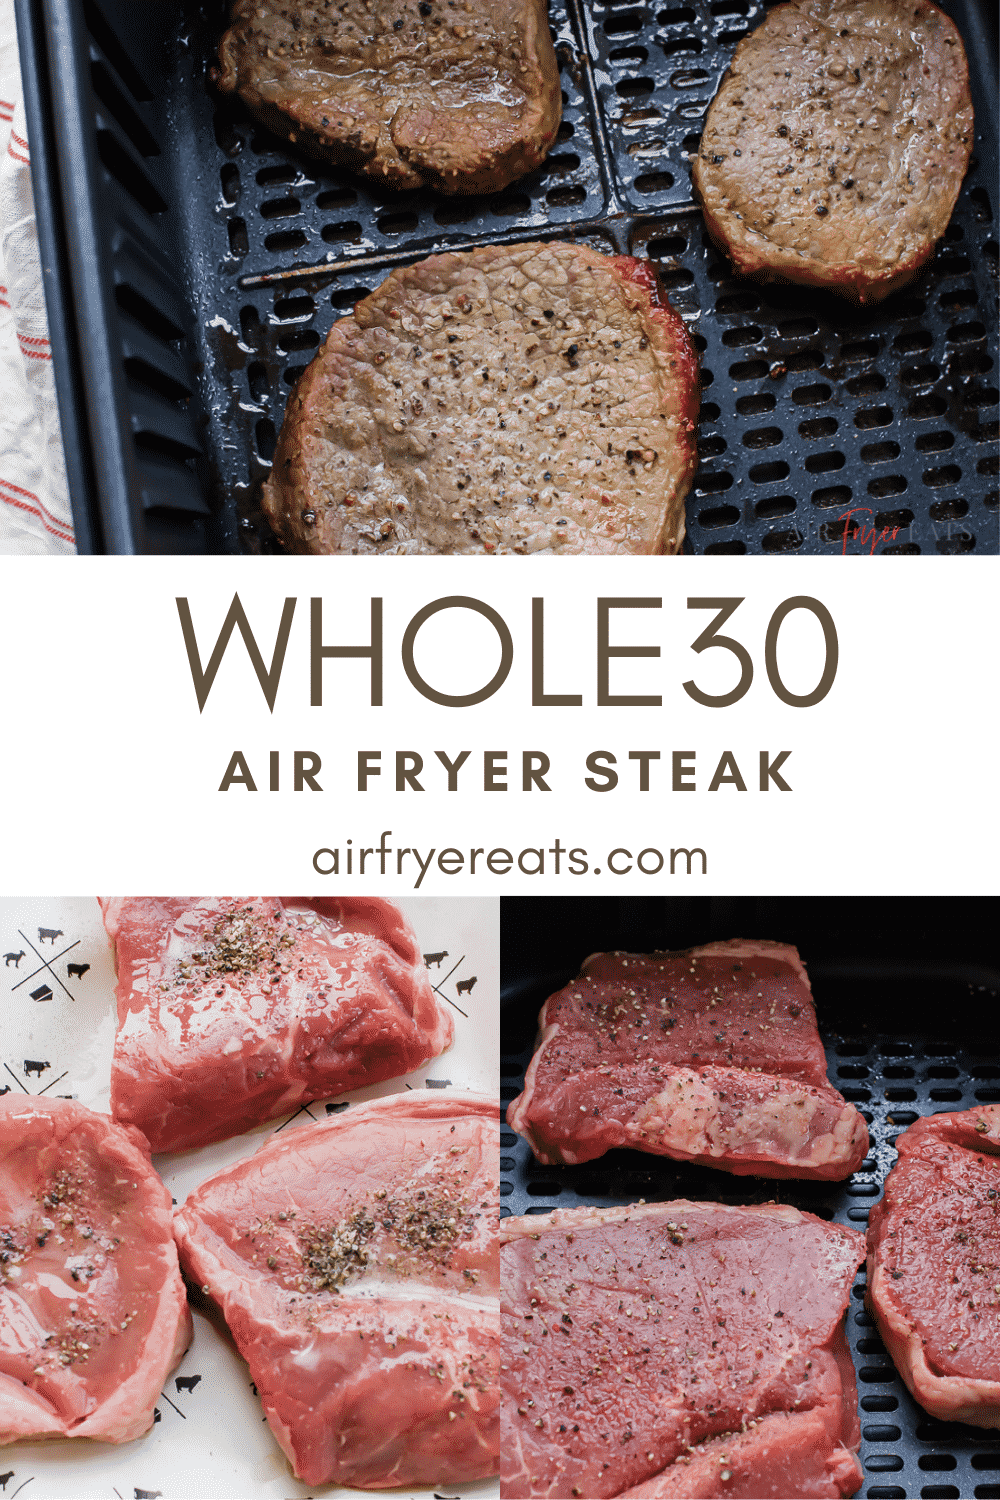 What's more satisfying than a perfectly cooked steak made right in your own kitchen? You'll go crazy for this easy 10 minute air fryer steak recipe! #airfryersteak #airfryer via @vegetarianmamma